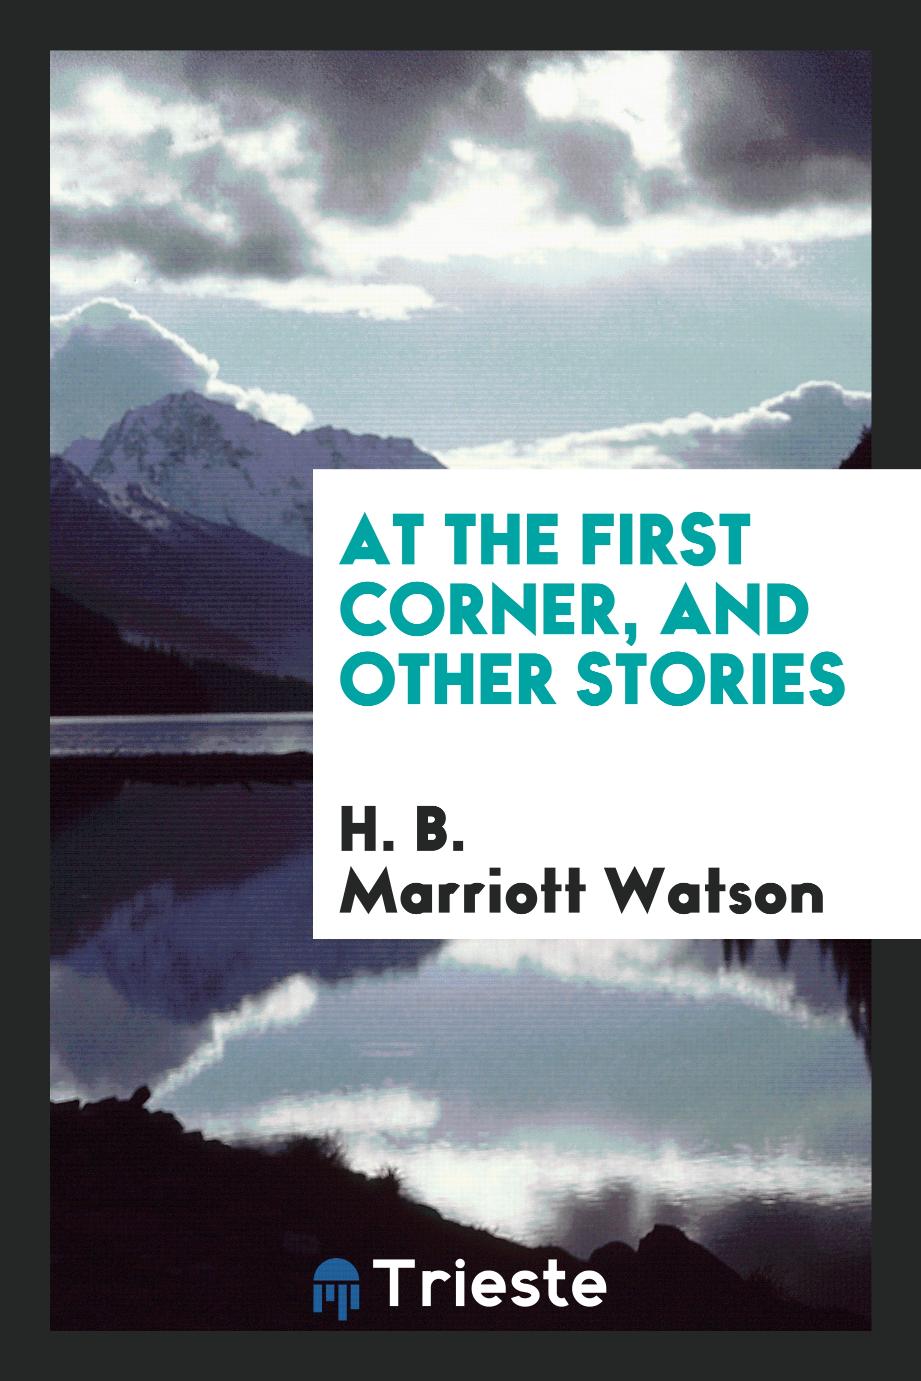 At the first corner, and other stories